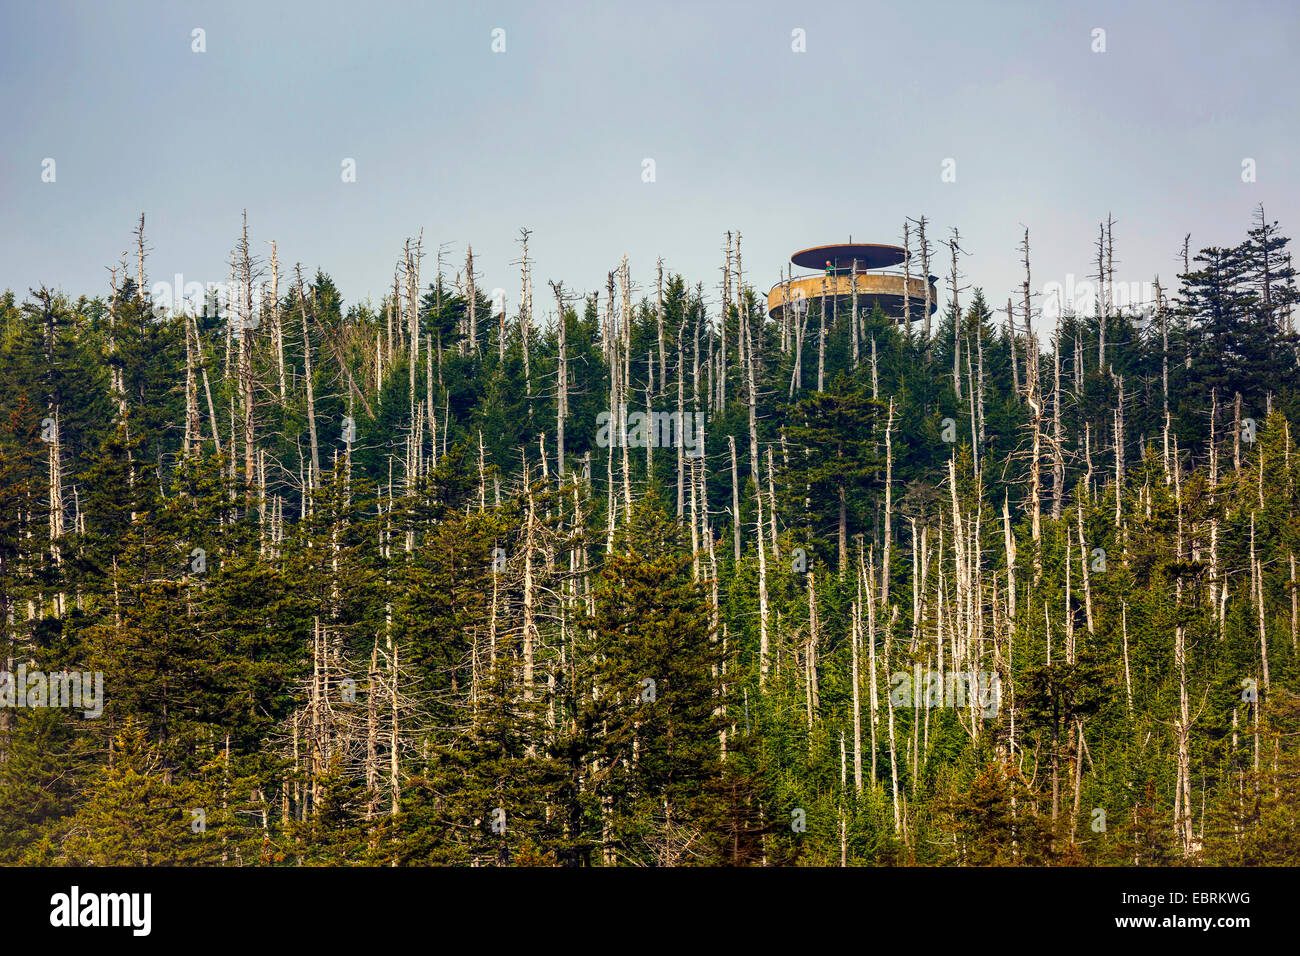 lookout tower in a conifer forest with coniferous forest, USA, Tennessee, Great Smoky Mountains National Park Stock Photo